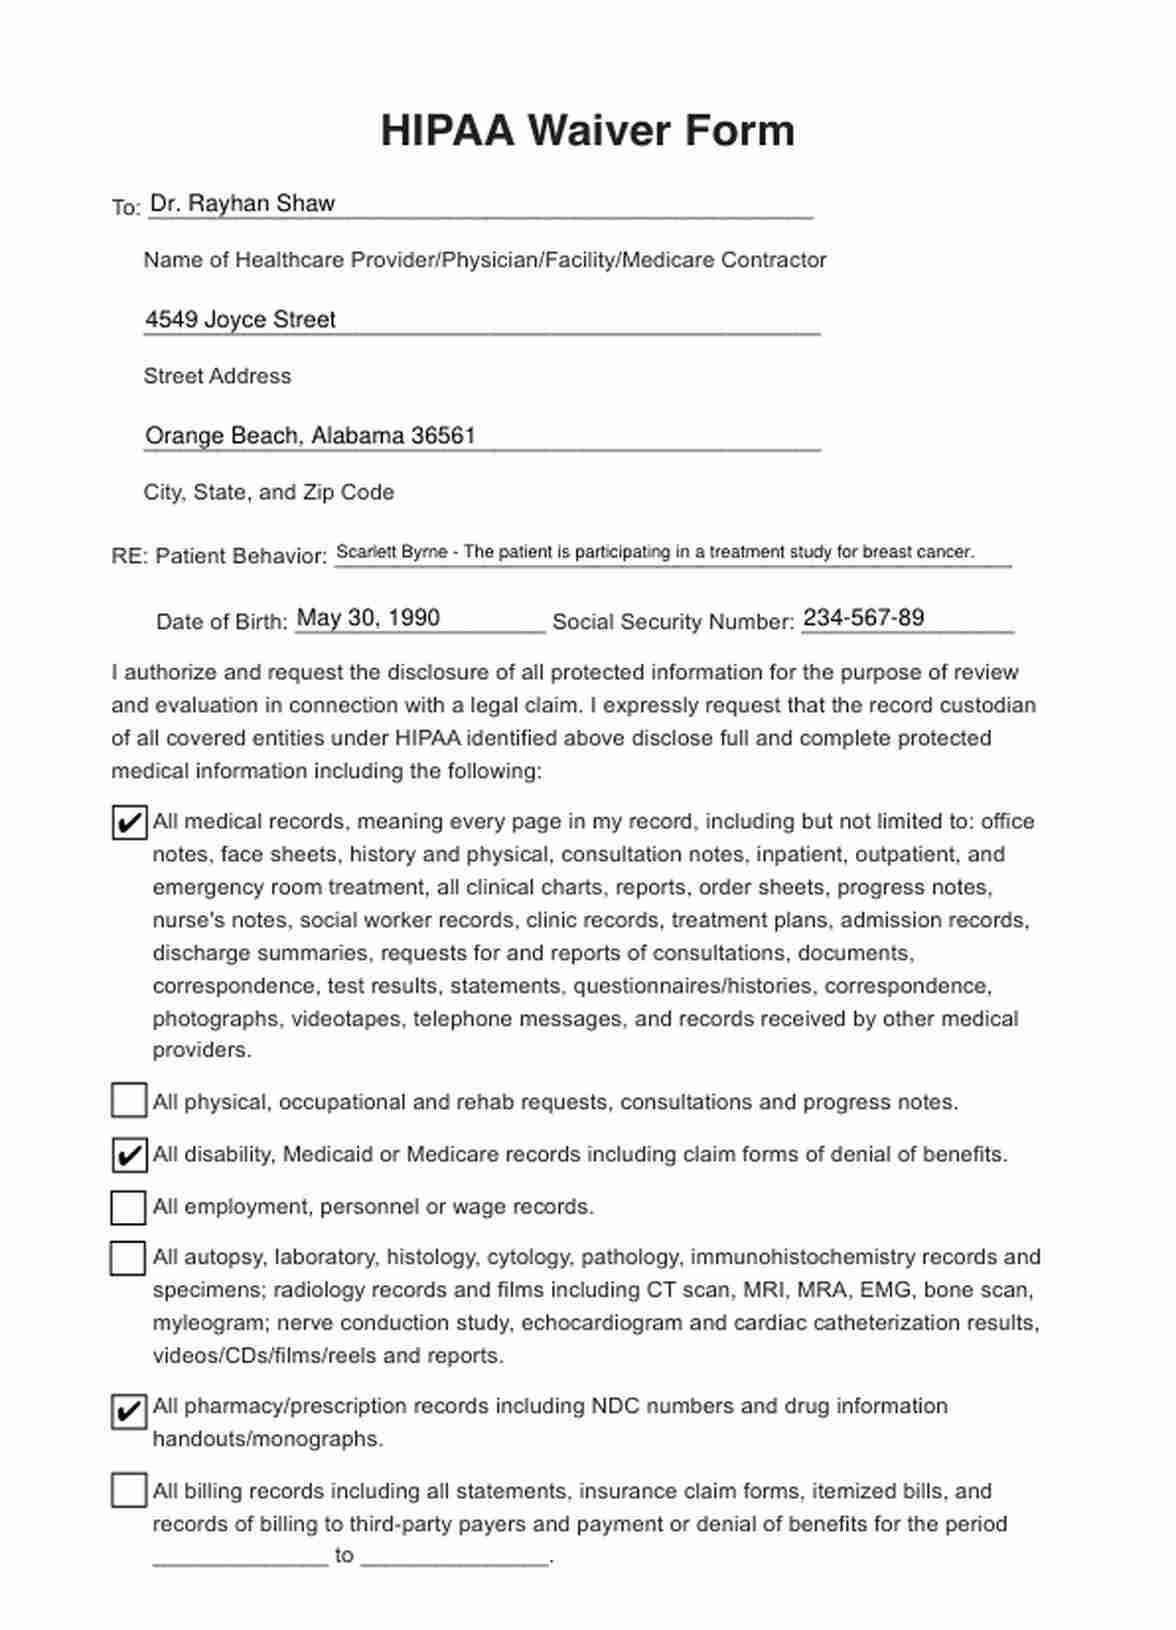 HIPAA Waiver Forms PDF Example